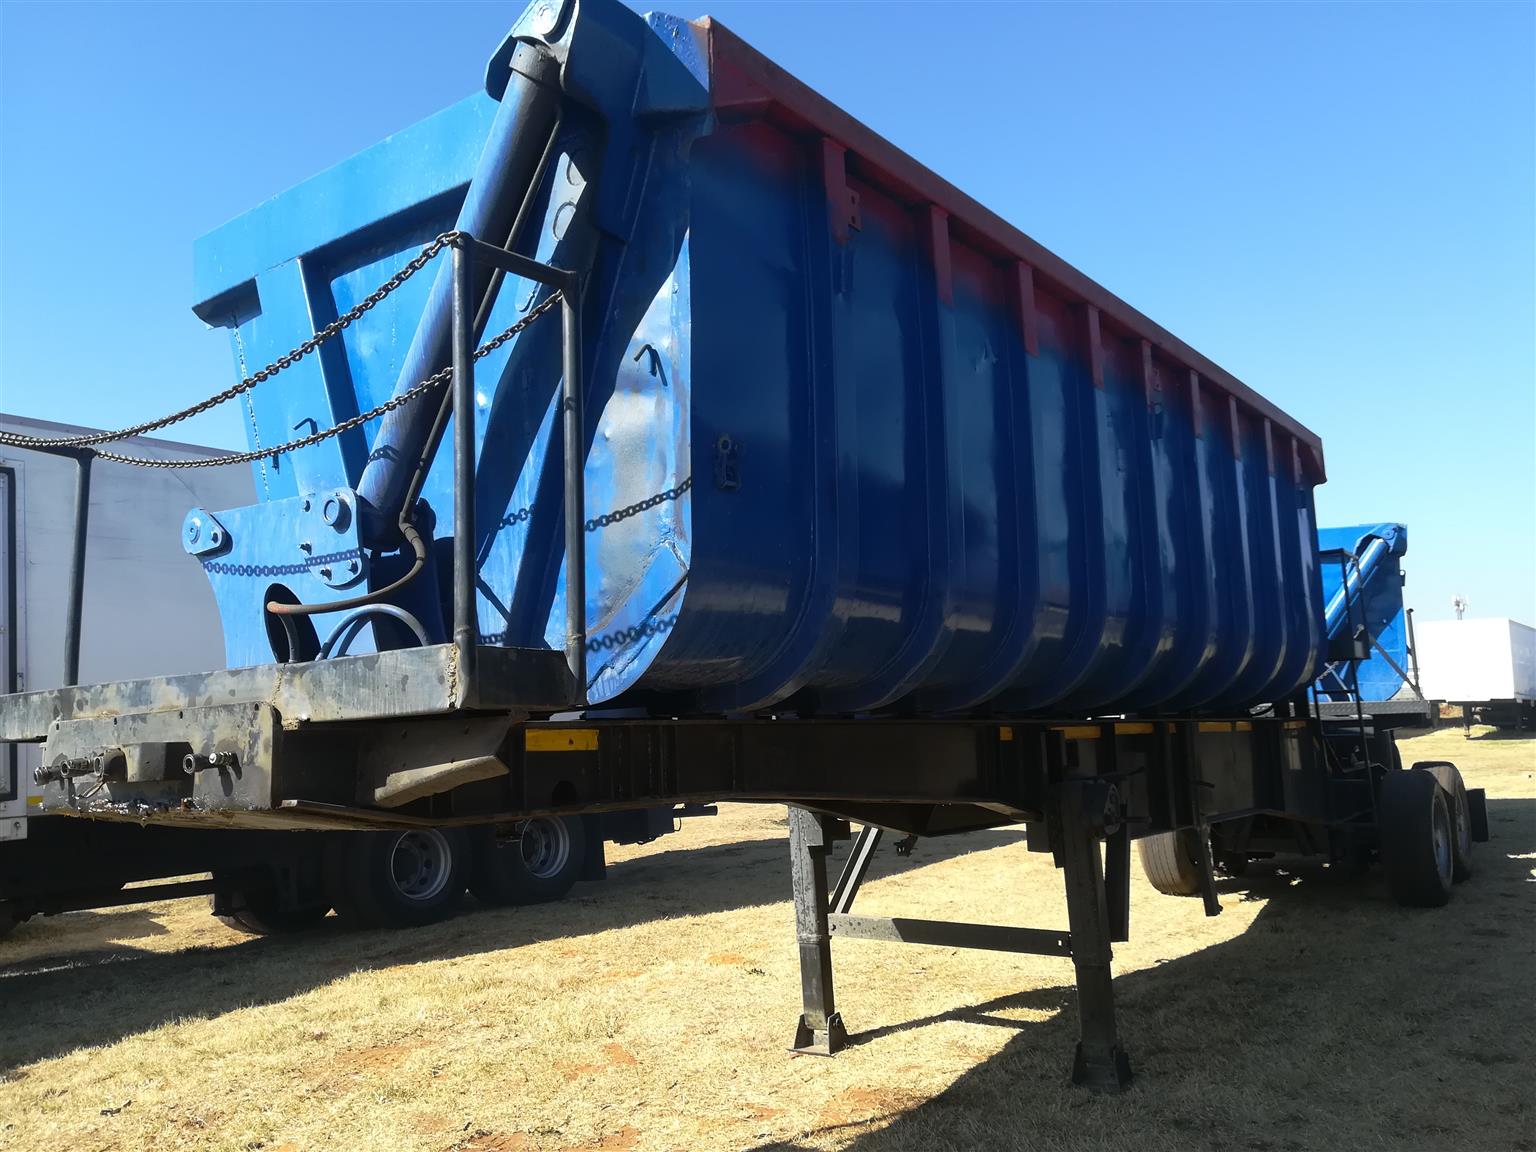 Start Your Own Trucking Business, 34 Ton Side Tippers, Become A Trucker, New Truckers Welcome, Northern Cape Province, South Africa